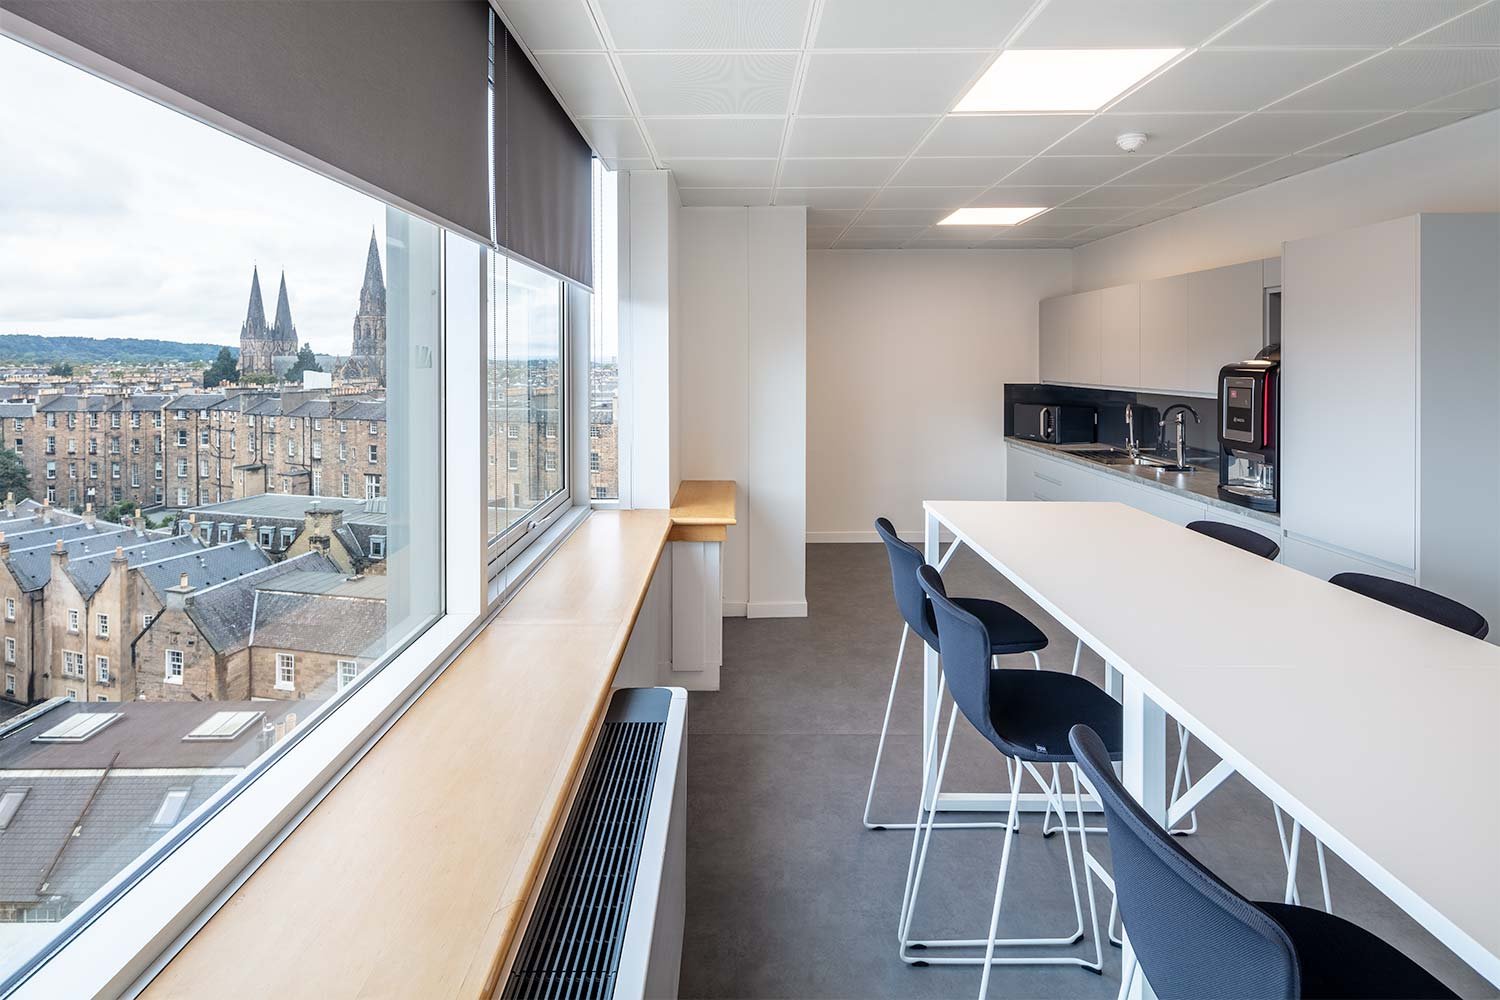 Office canteen with great views over Edinburgh